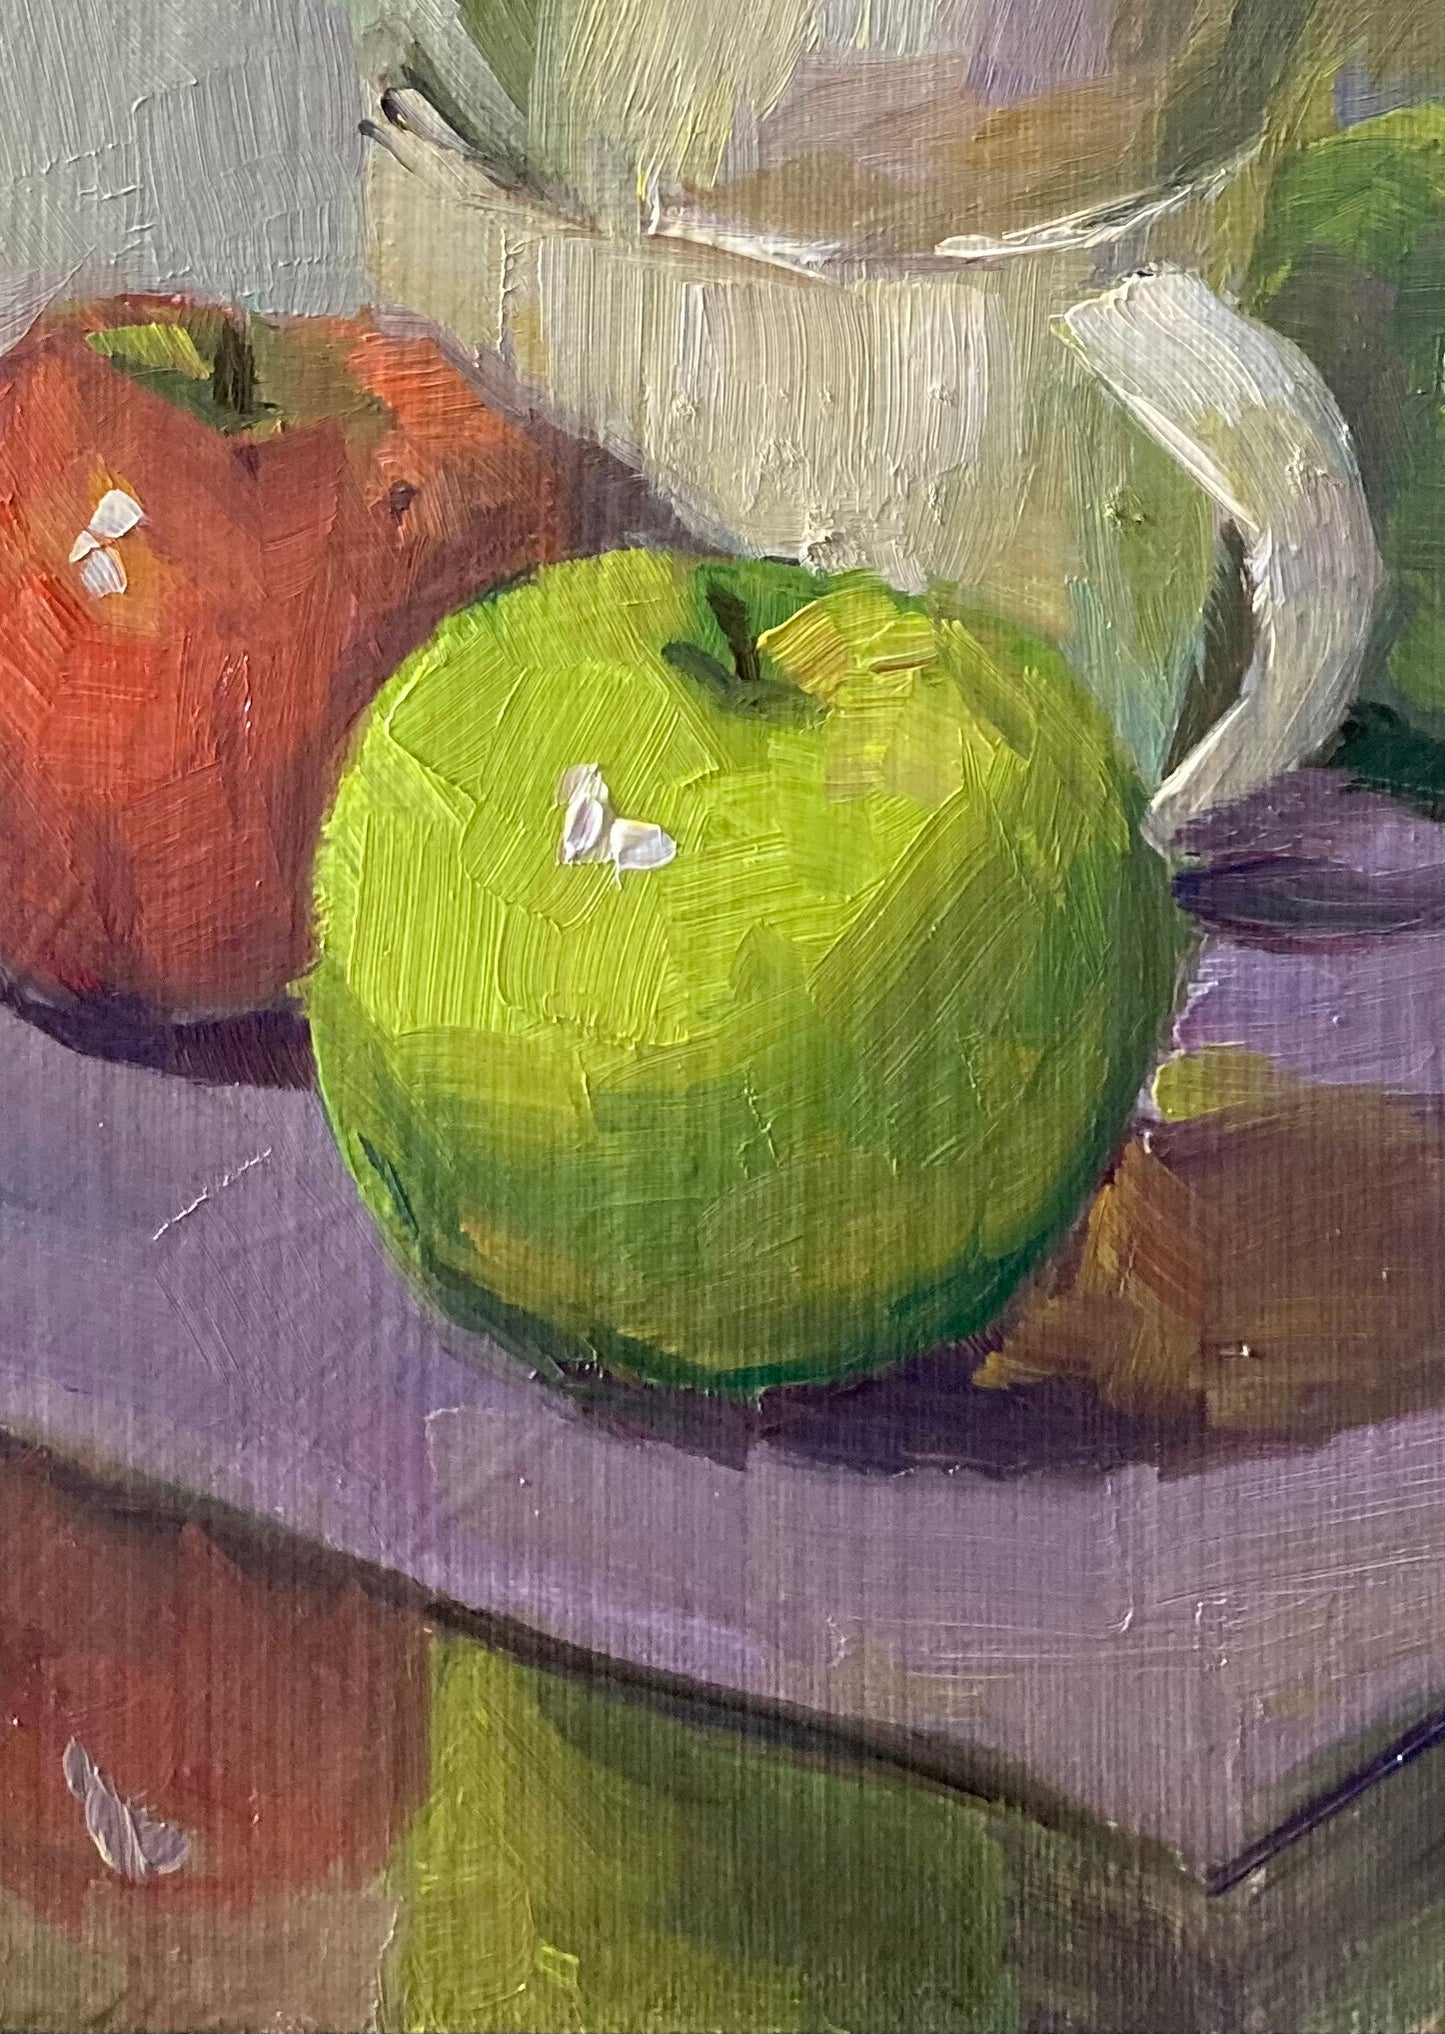 Green and Red Apples 2 - Small Original Oil Painting